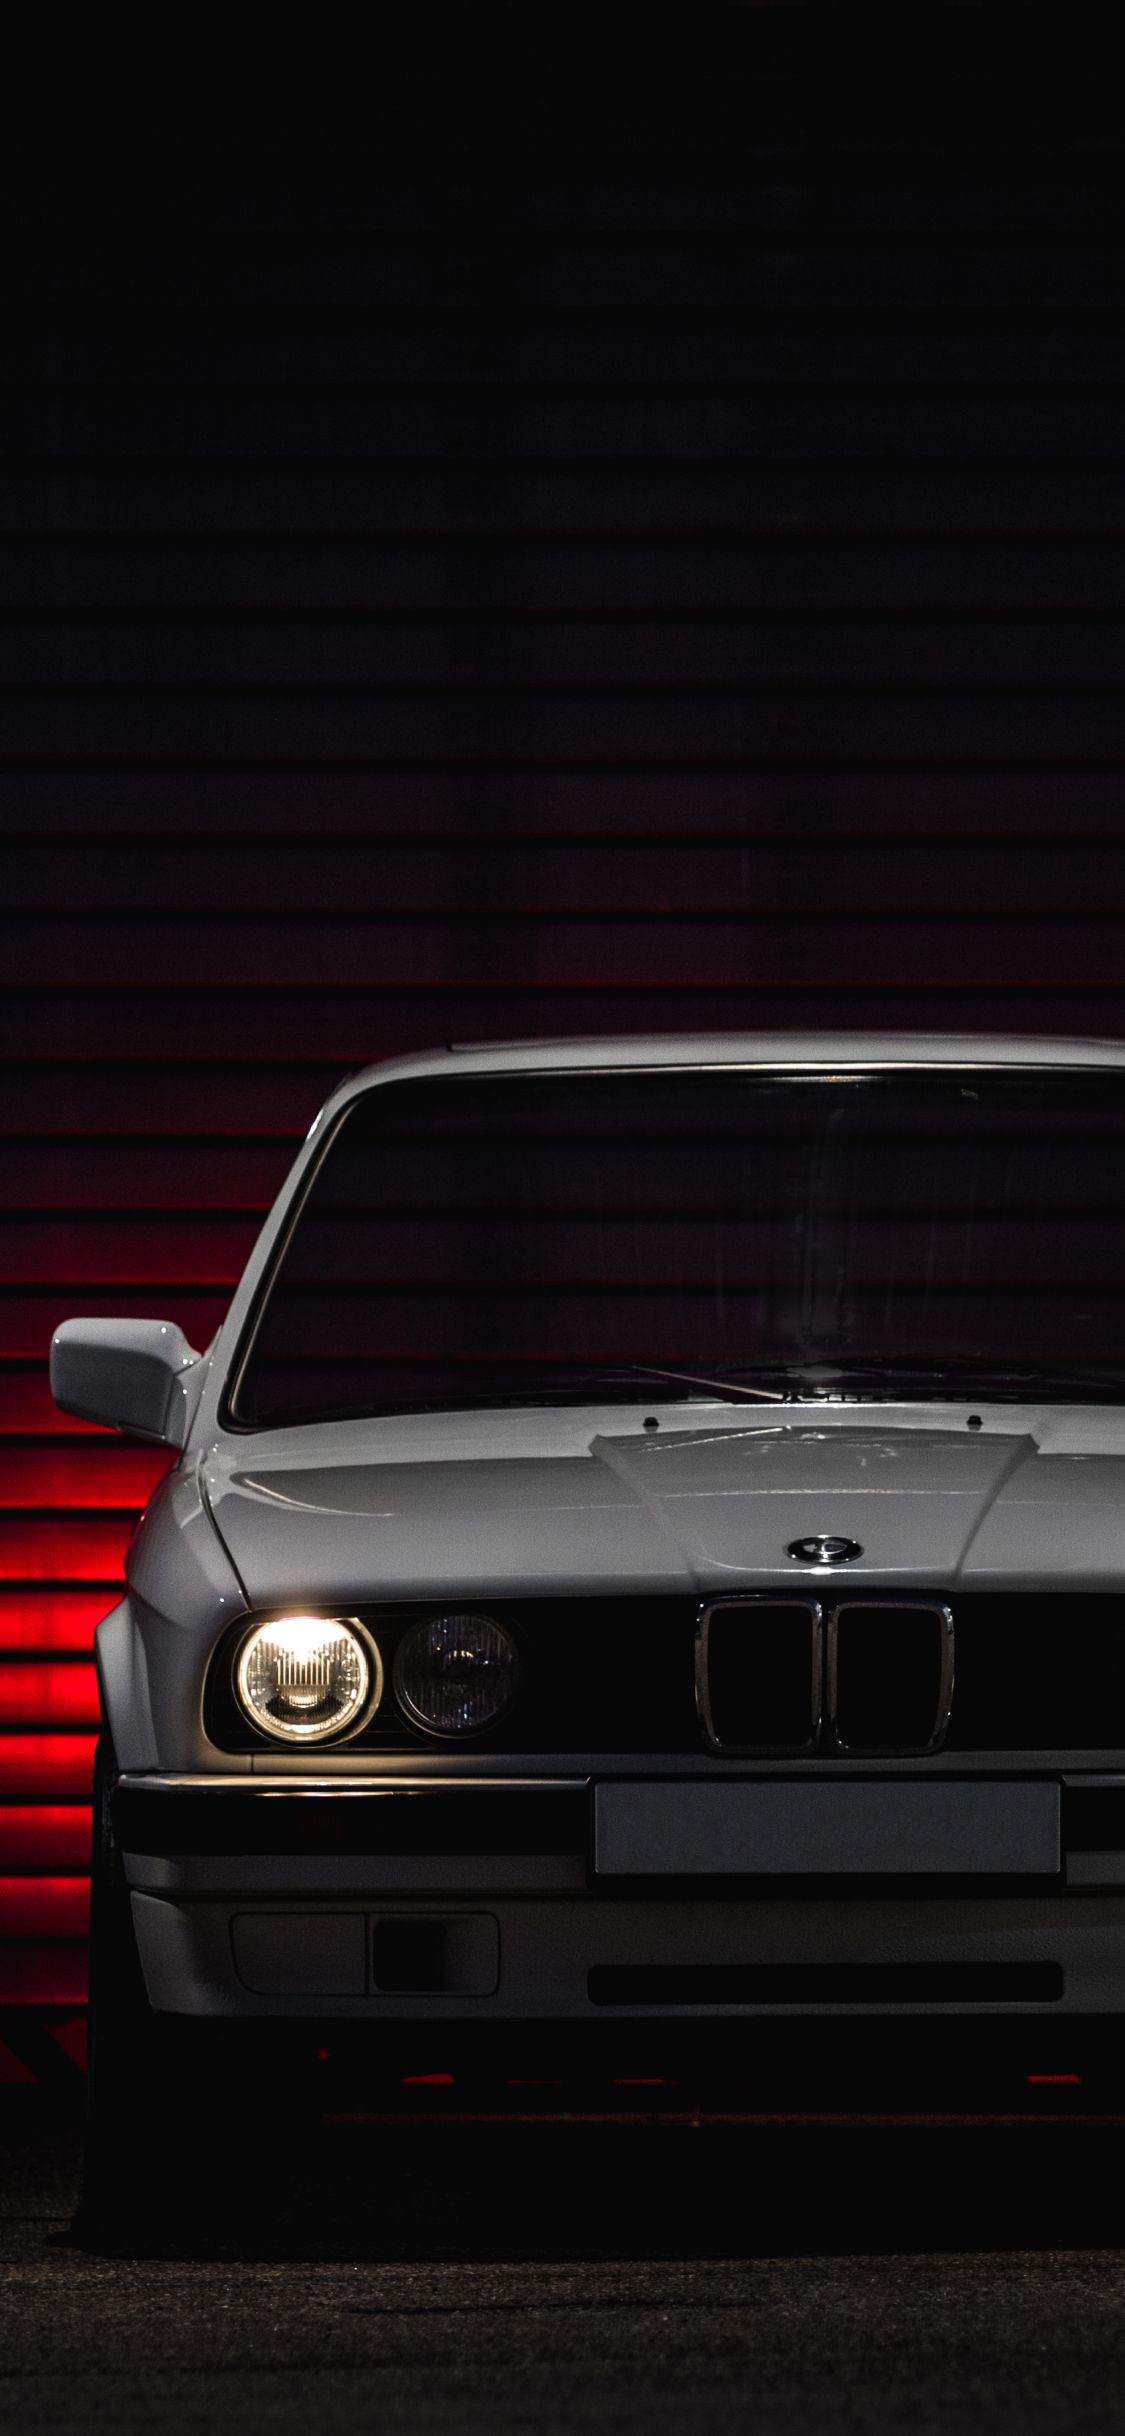 BMW E30 Car iPhone XS, iPhone iPhone X Wallpaper, HD Cars 4K Wallpaper, Image, Photo and Background